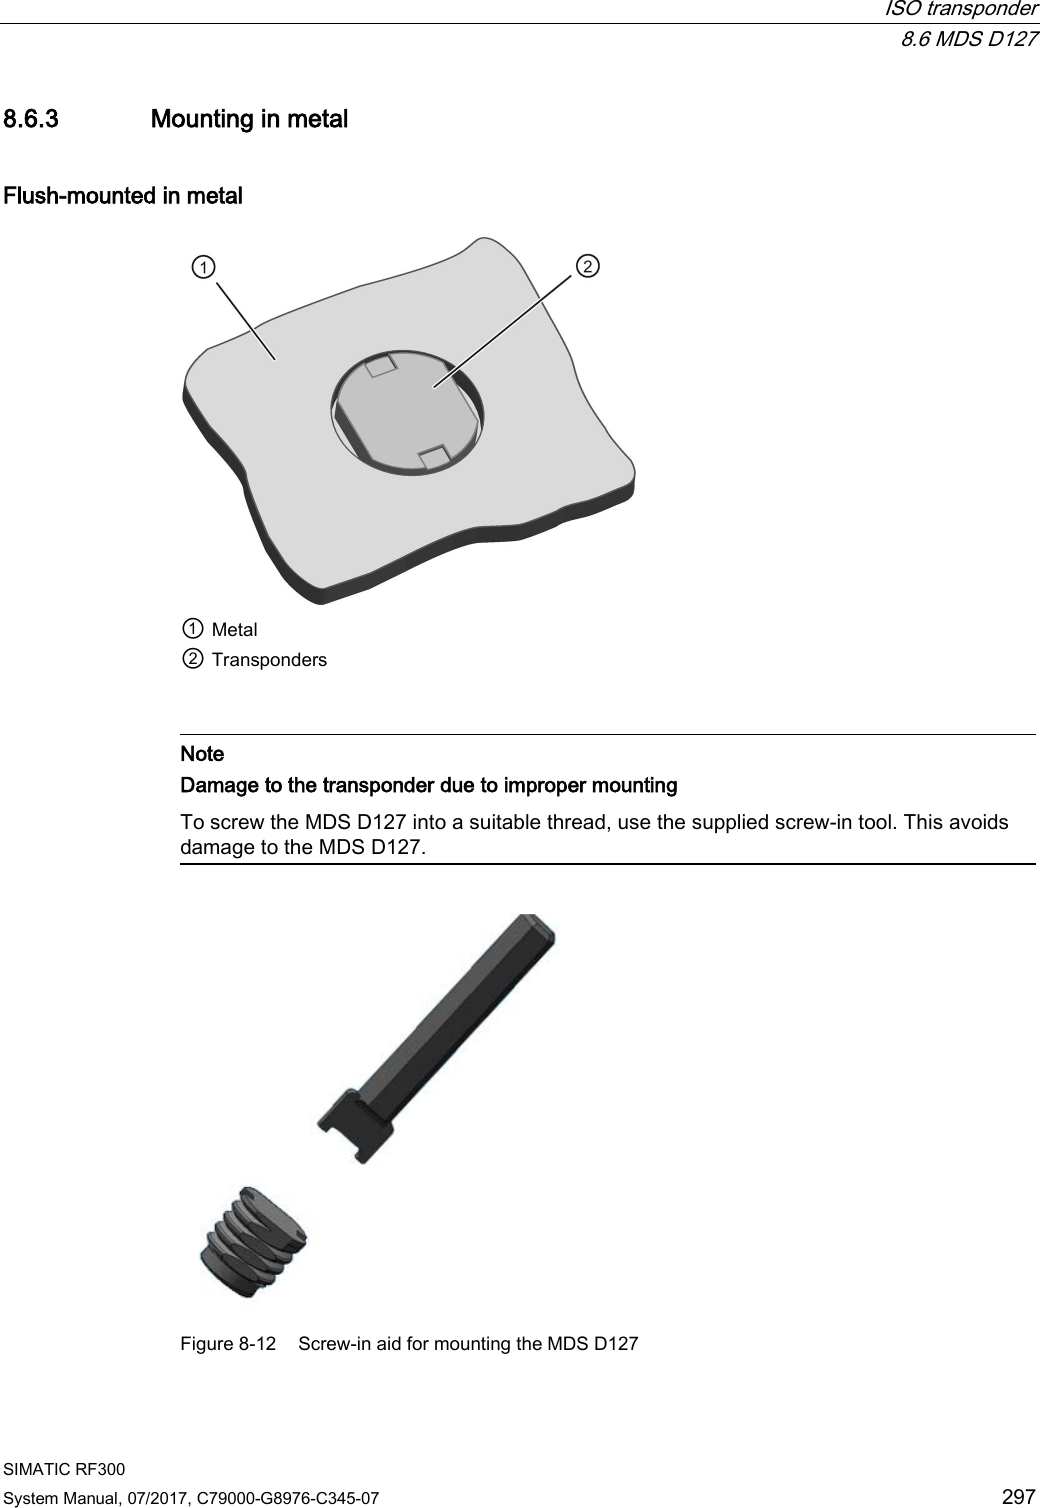  ISO transponder  8.6 MDS D127 SIMATIC RF300 System Manual, 07/2017, C79000-G8976-C345-07 297 8.6.3 Mounting in metal Flush-mounted in metal  ① Metal ② Transponders    Note Damage to the transponder due to improper mounting To screw the MDS D127 into a suitable thread, use the supplied screw-in tool. This avoids damage to the MDS D127.   Figure 8-12  Screw-in aid for mounting the MDS D127 